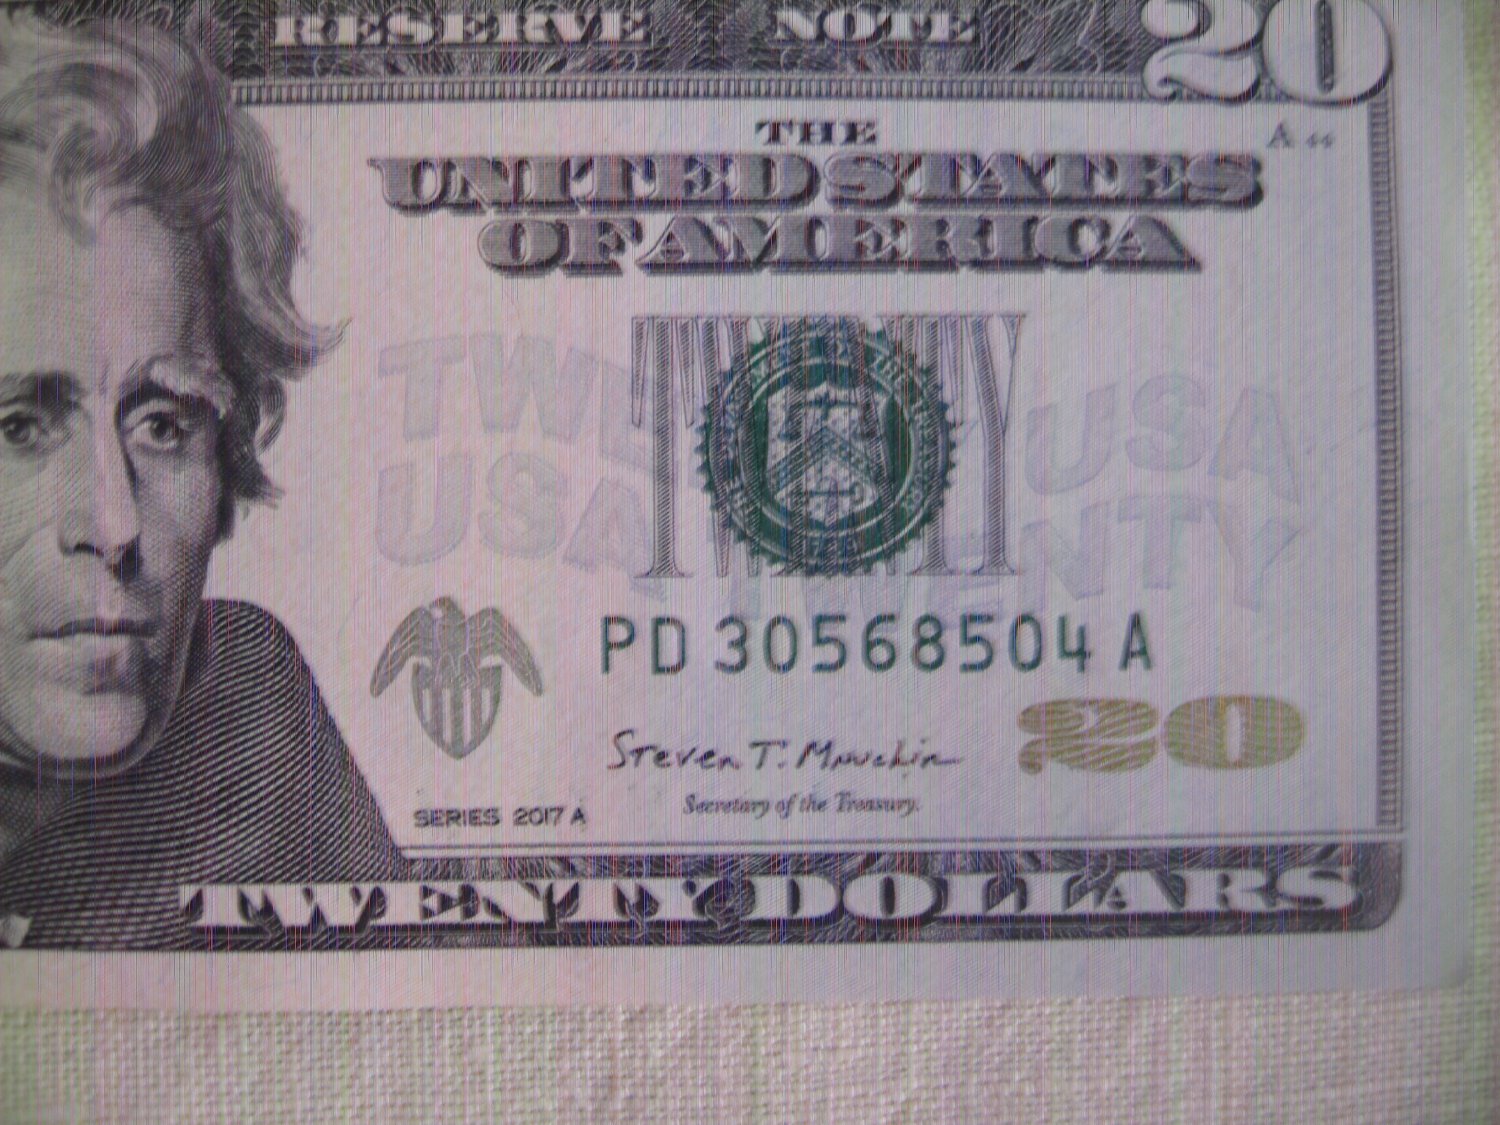 20 dollar bills with consecutive serial numbers